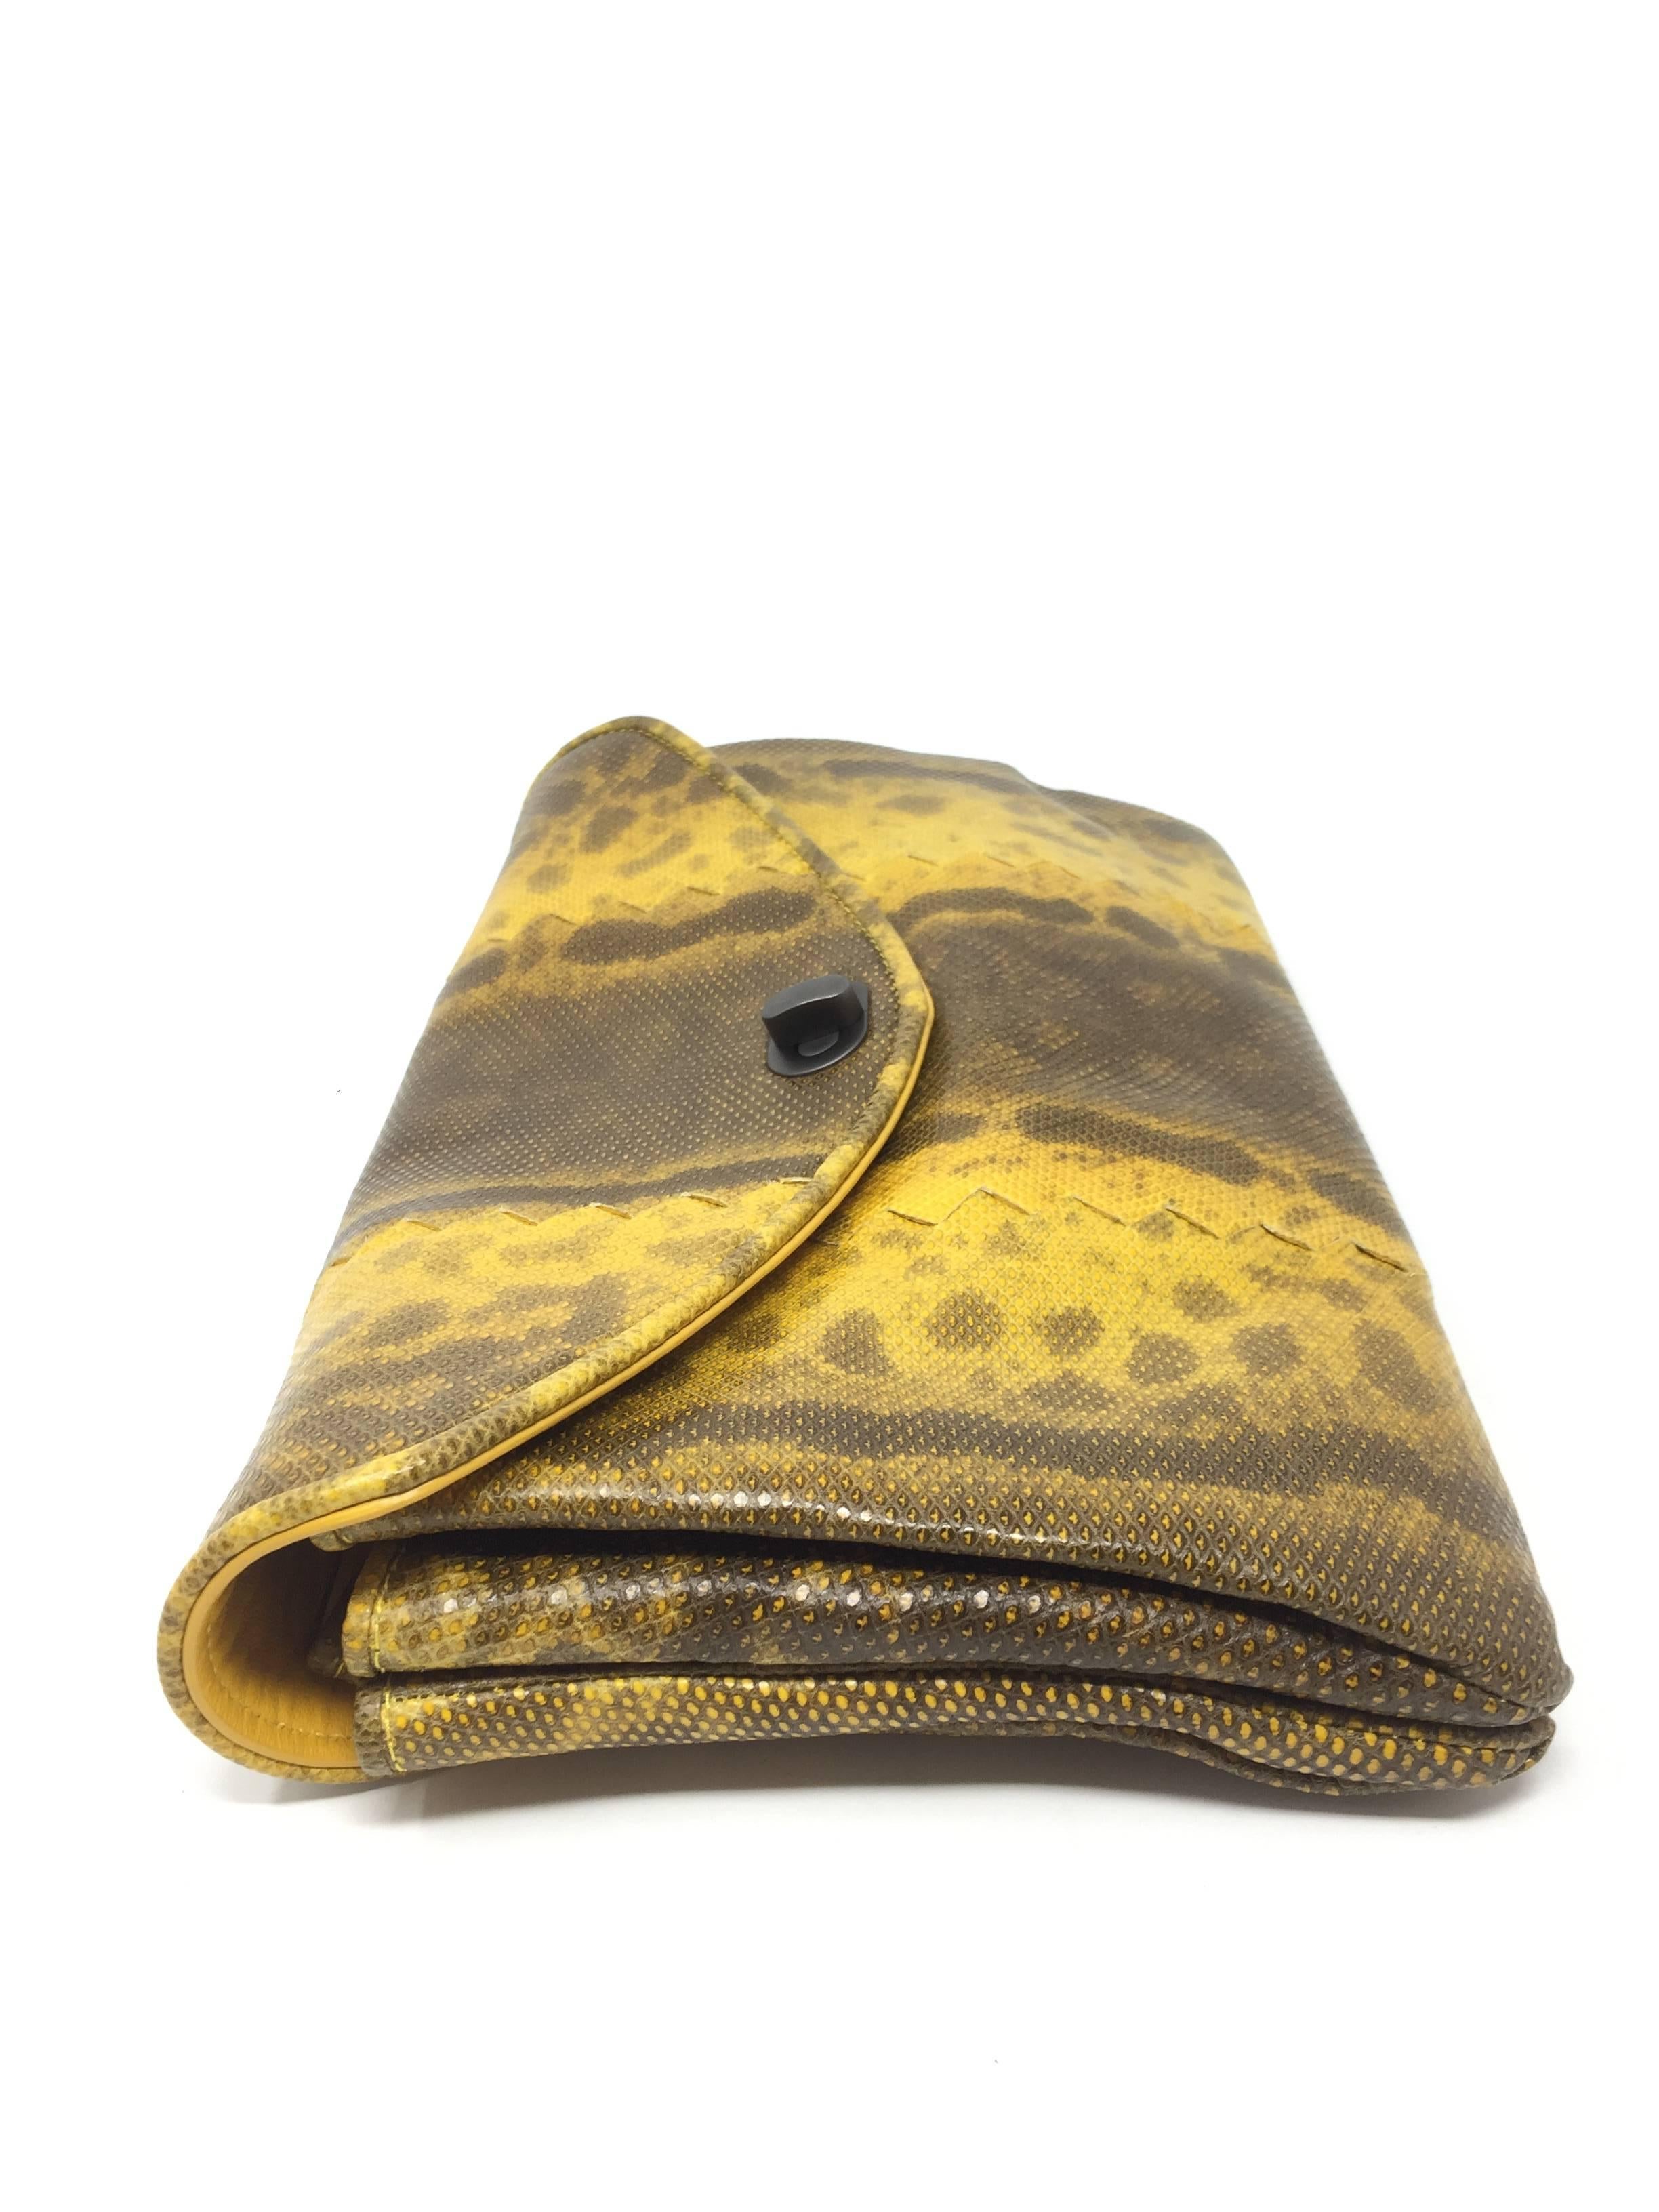 Bottega Veneta mustard yellow lizard clutch featuring woven patchwork design and extendable, accordion body. Turn lock clasp opens up a shared room for storage. Comfortably fits a cellphone, small wallet, and other essentials. 
 
Dimensions cm